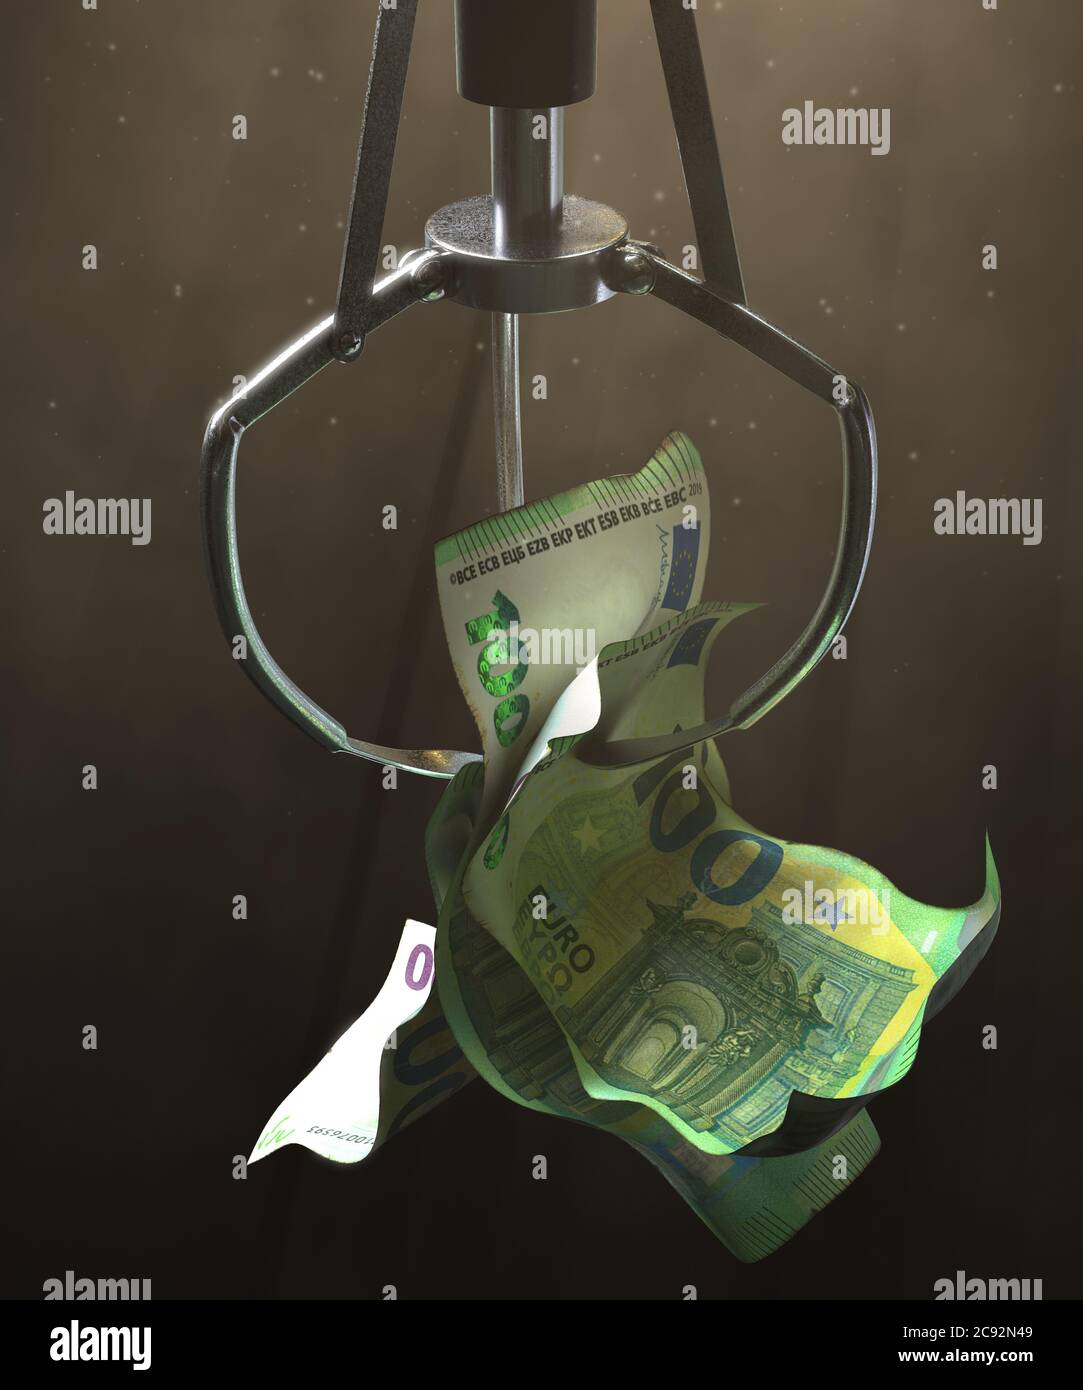 A robotic claw from an arcade type game gripping a wad of creased euro banknotes on a dark moody background - 3D render Stock Photo